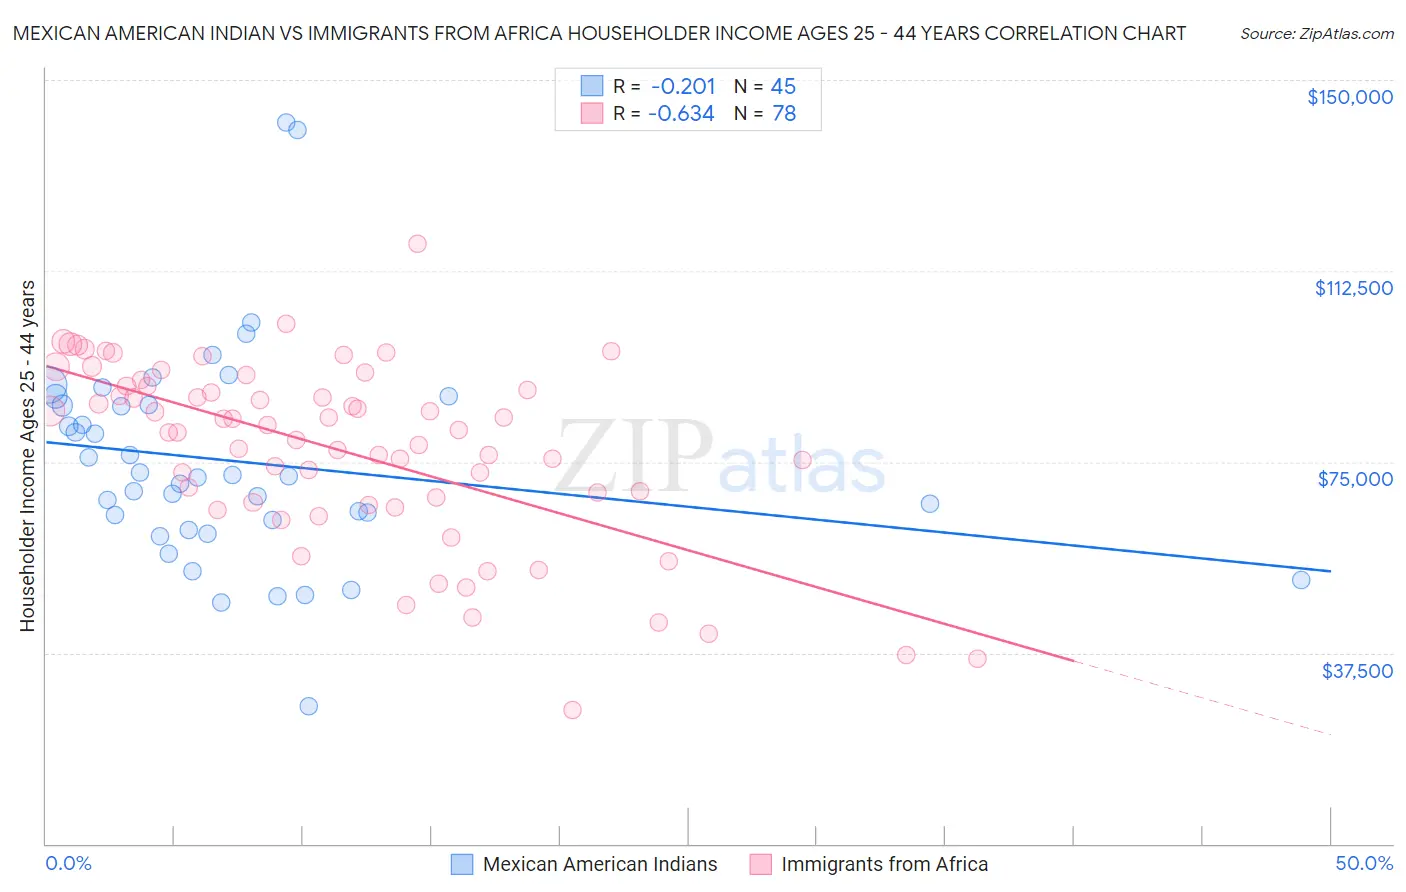 Mexican American Indian vs Immigrants from Africa Householder Income Ages 25 - 44 years